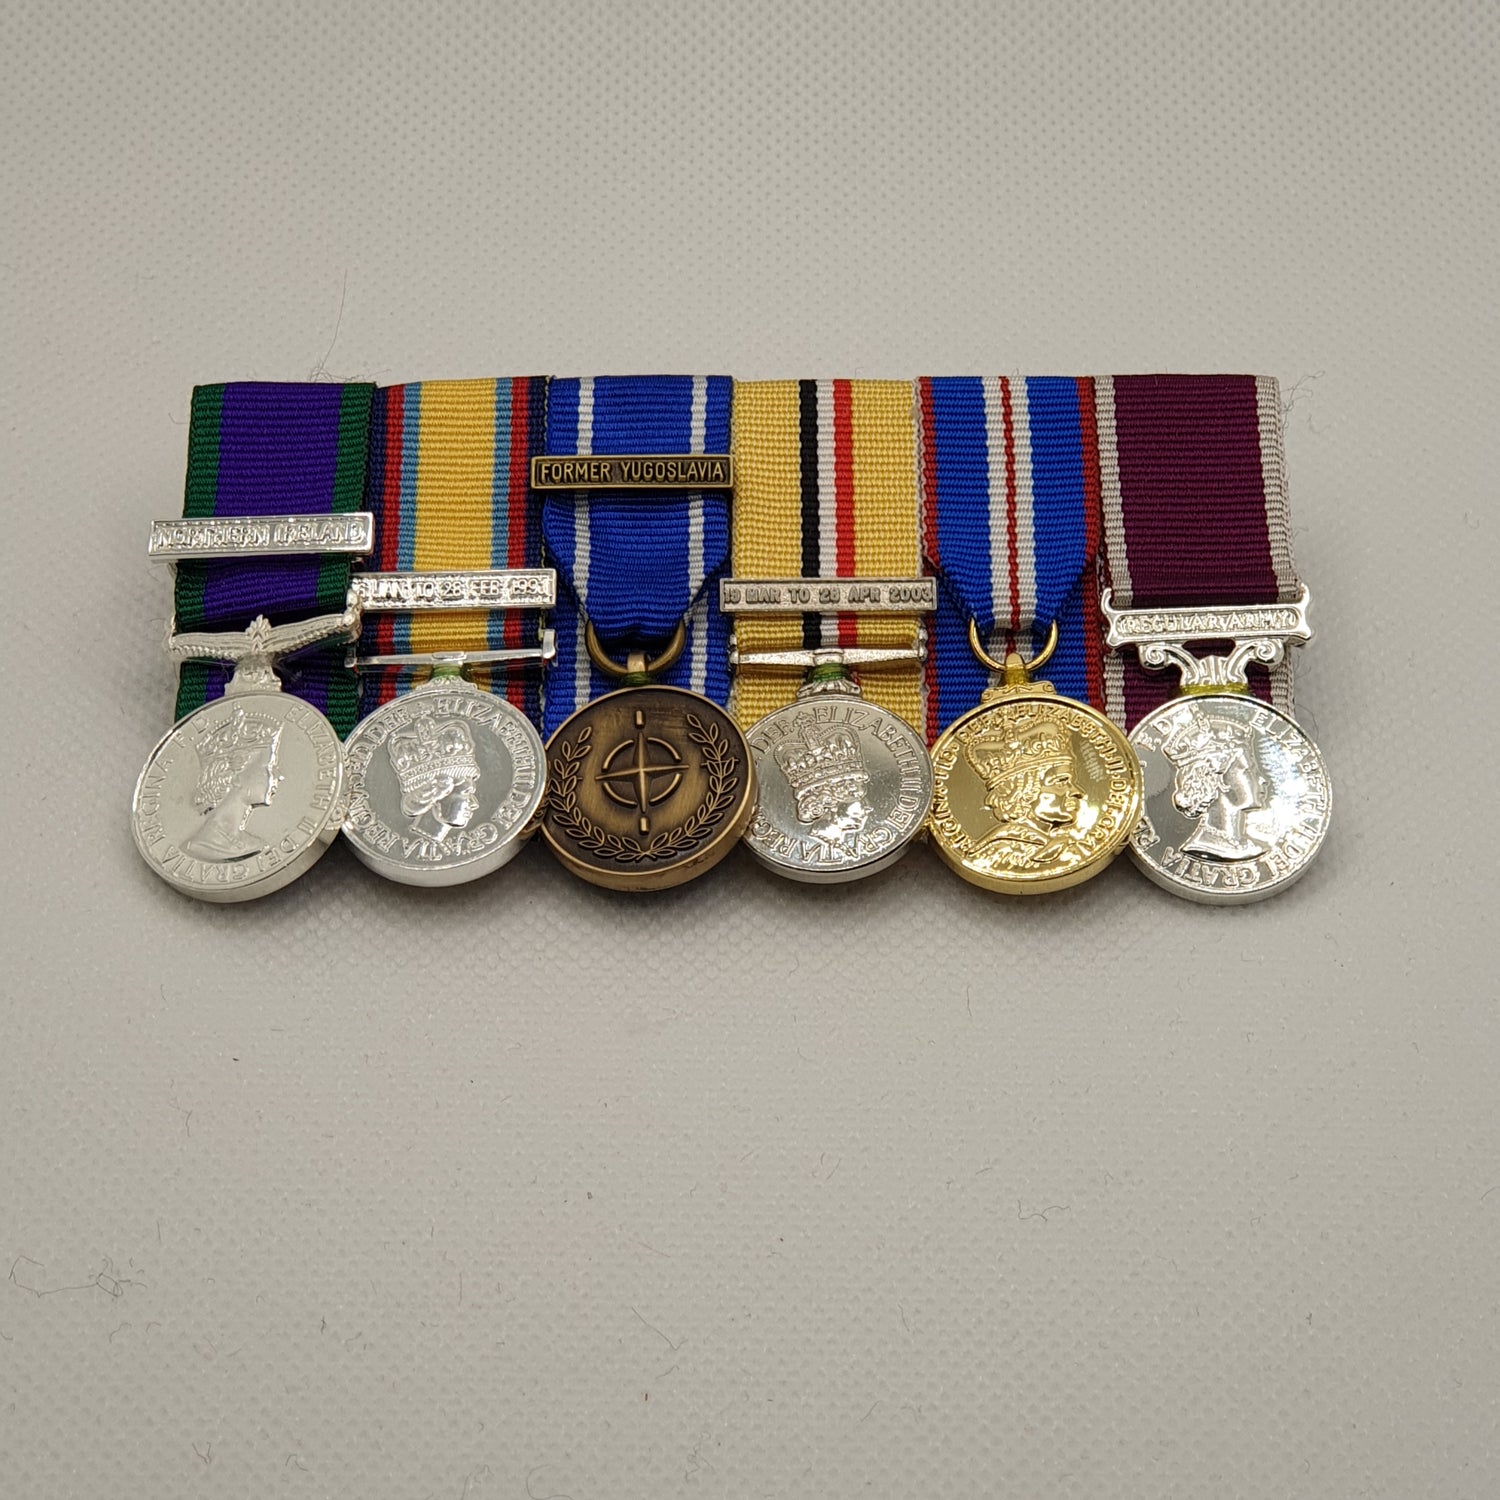 Professional Military Court Medal Mounting Service – Medal Mounting Services